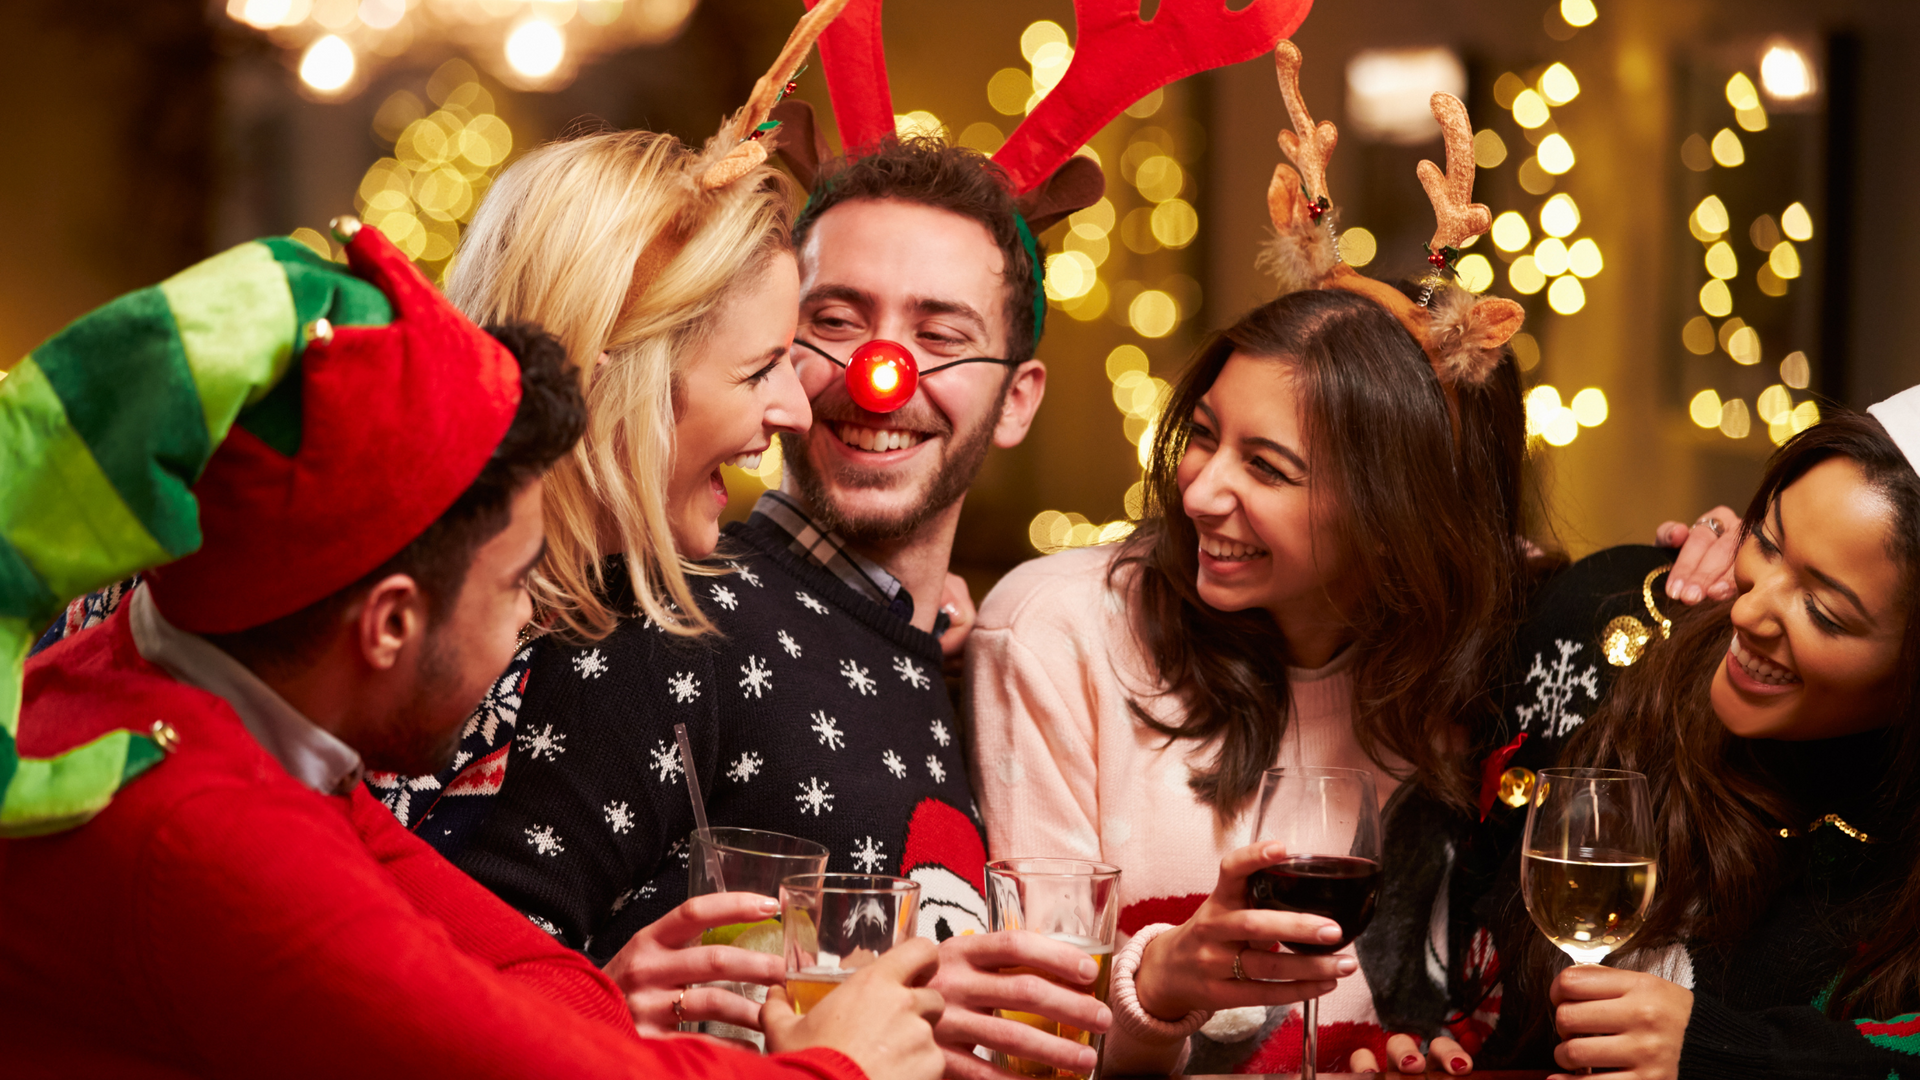 Image with five friends dressed in Christmas attire. They have alcoholic drinks in their hands.